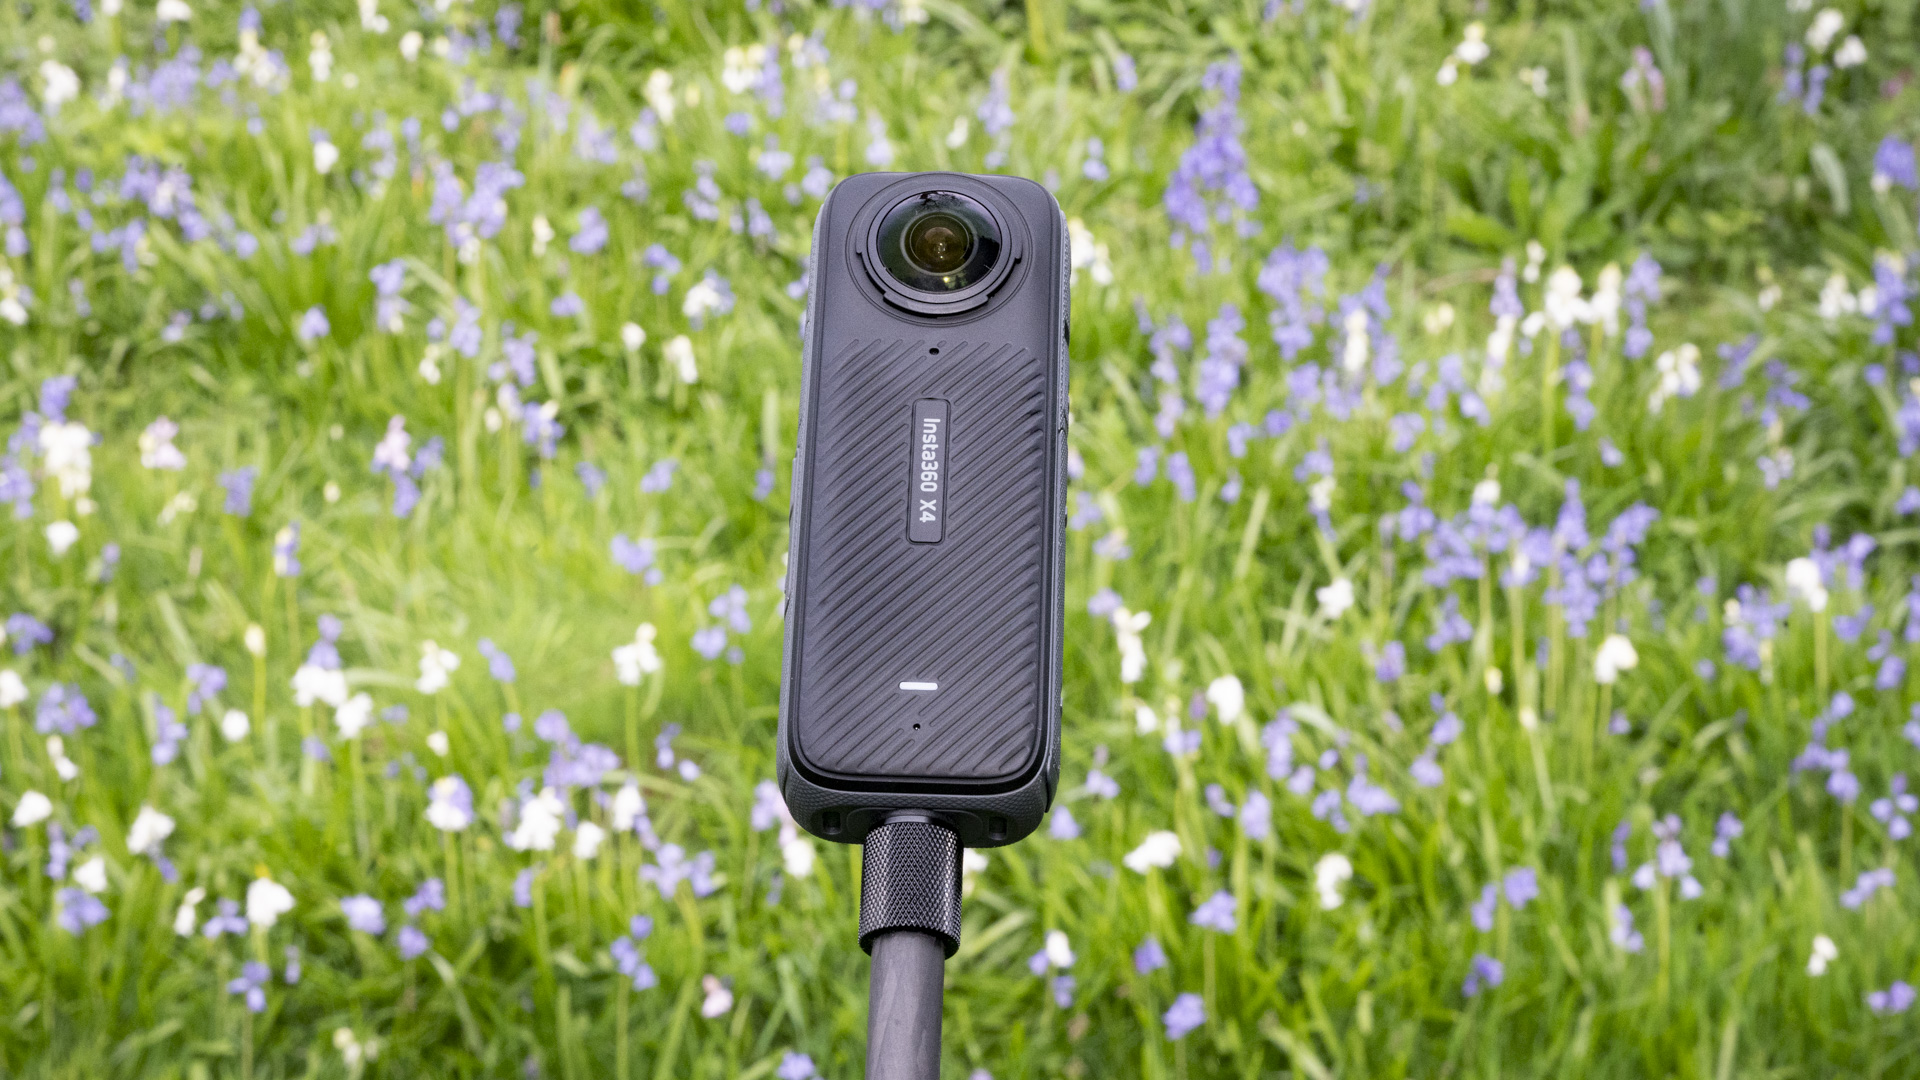 Insta360 X4 360 degree camera outdoors with vibrant grassy background on a selfie stick